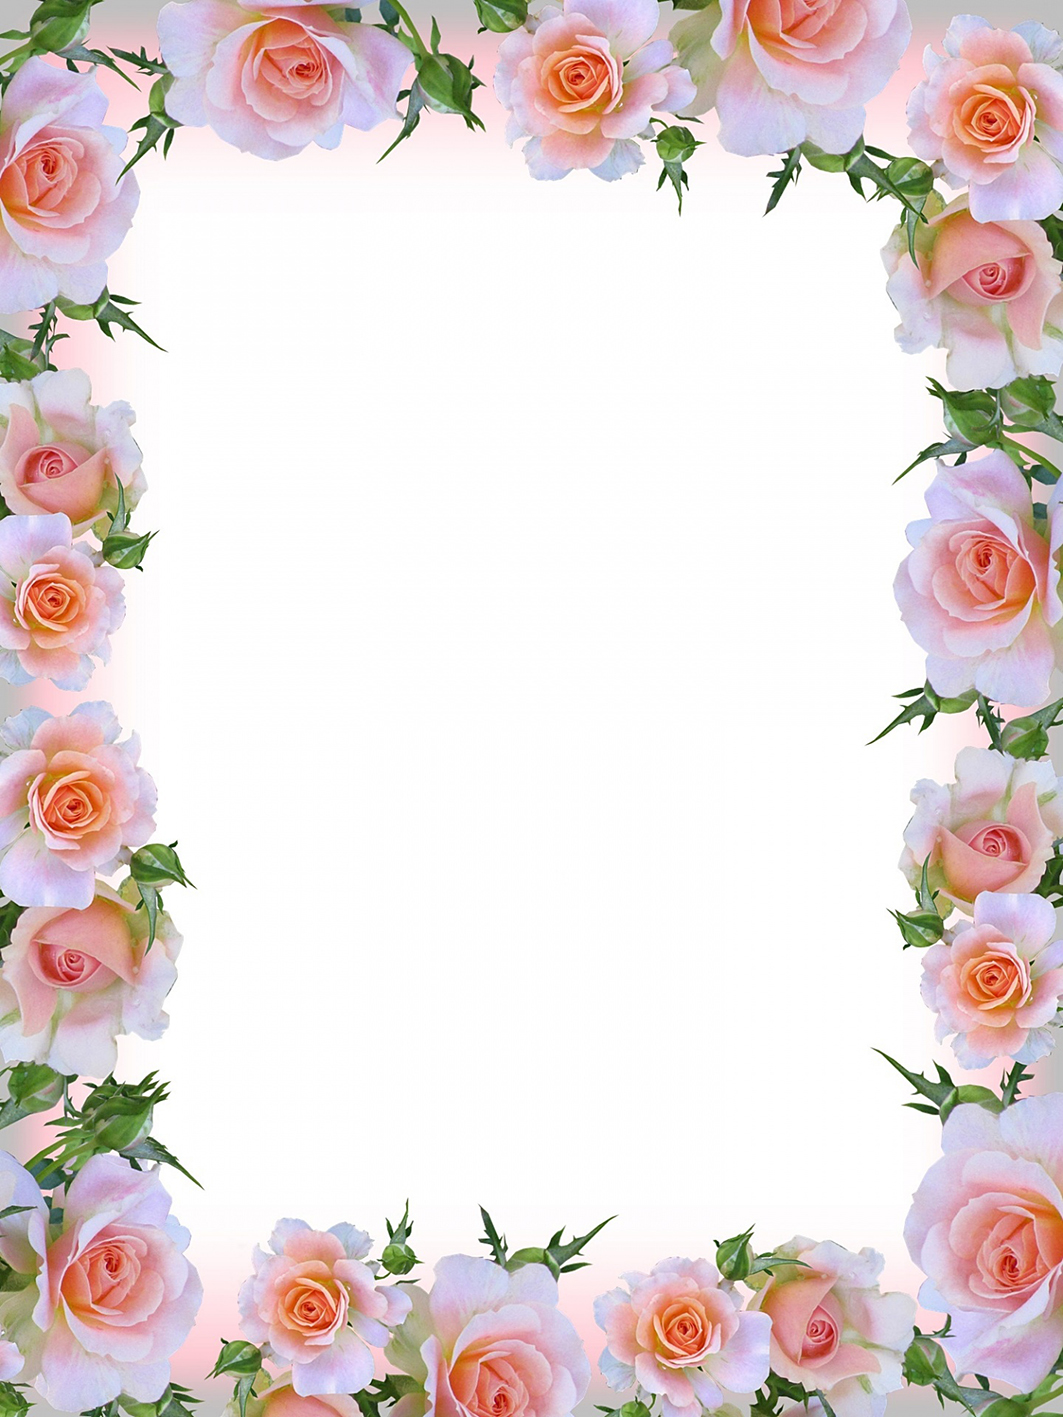 flower frame with pink roses